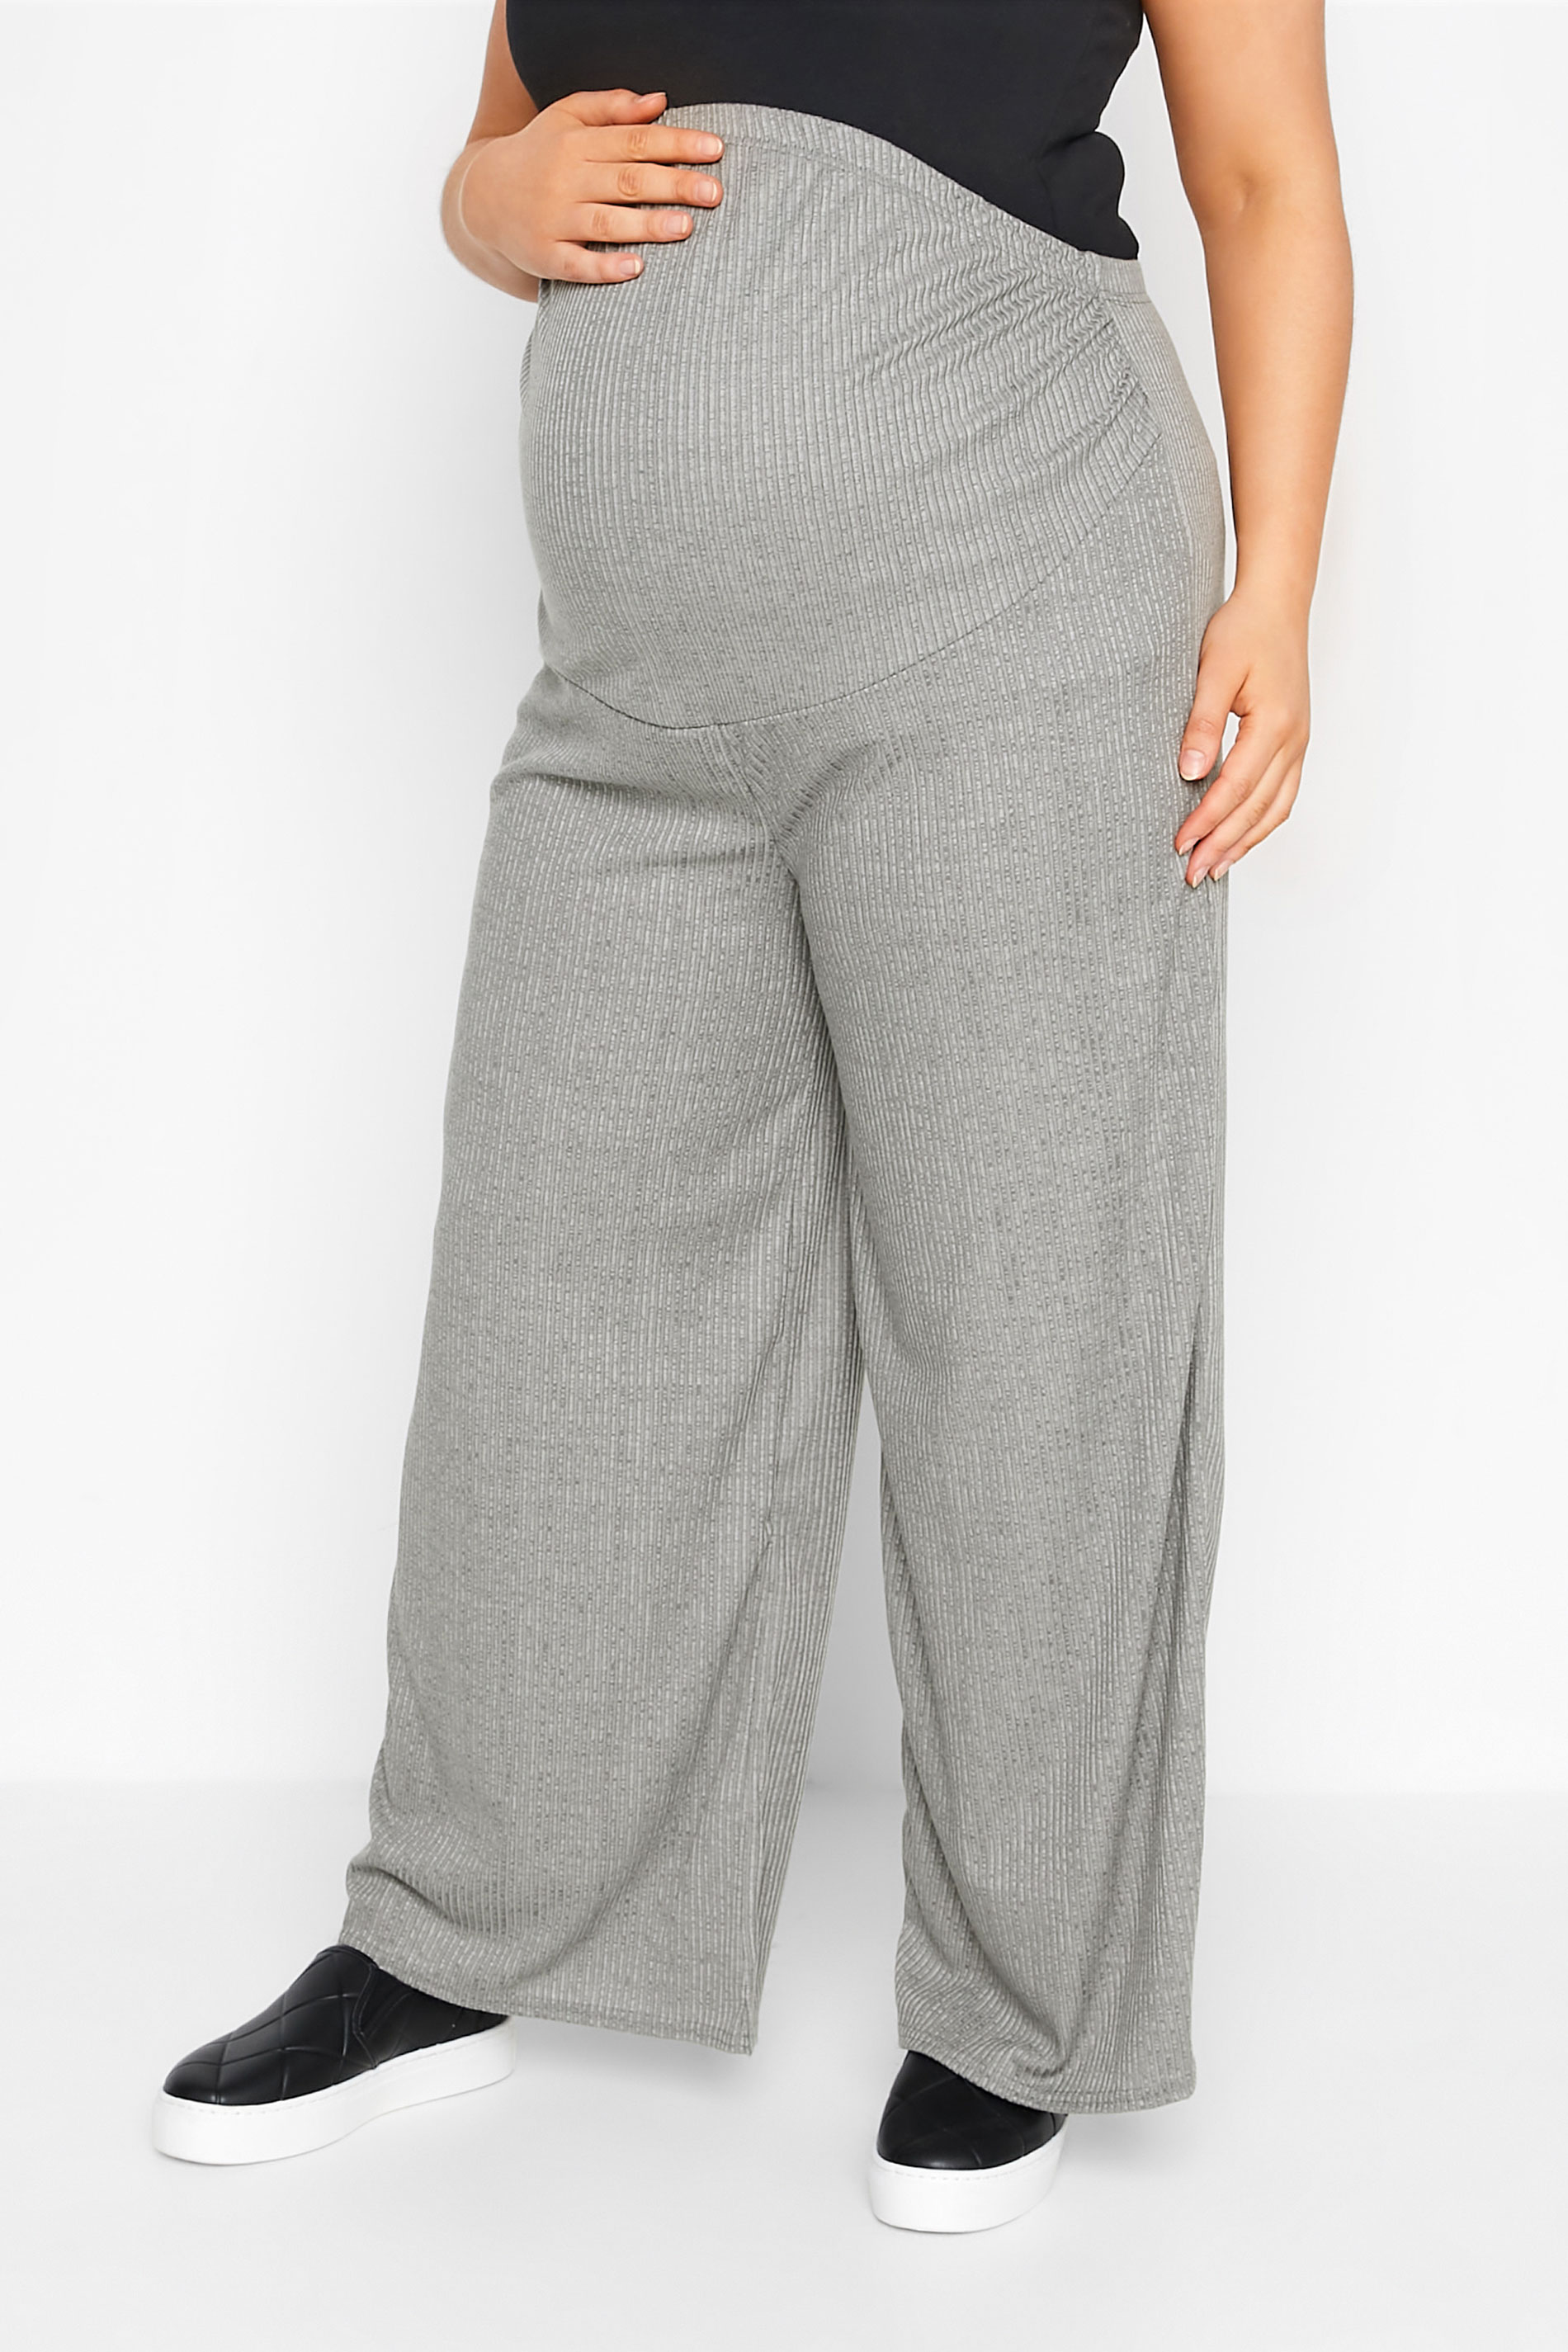 BUMP IT UP MATERNITY Curve Grey Ribbed Wide Leg Trousers_A.jpg